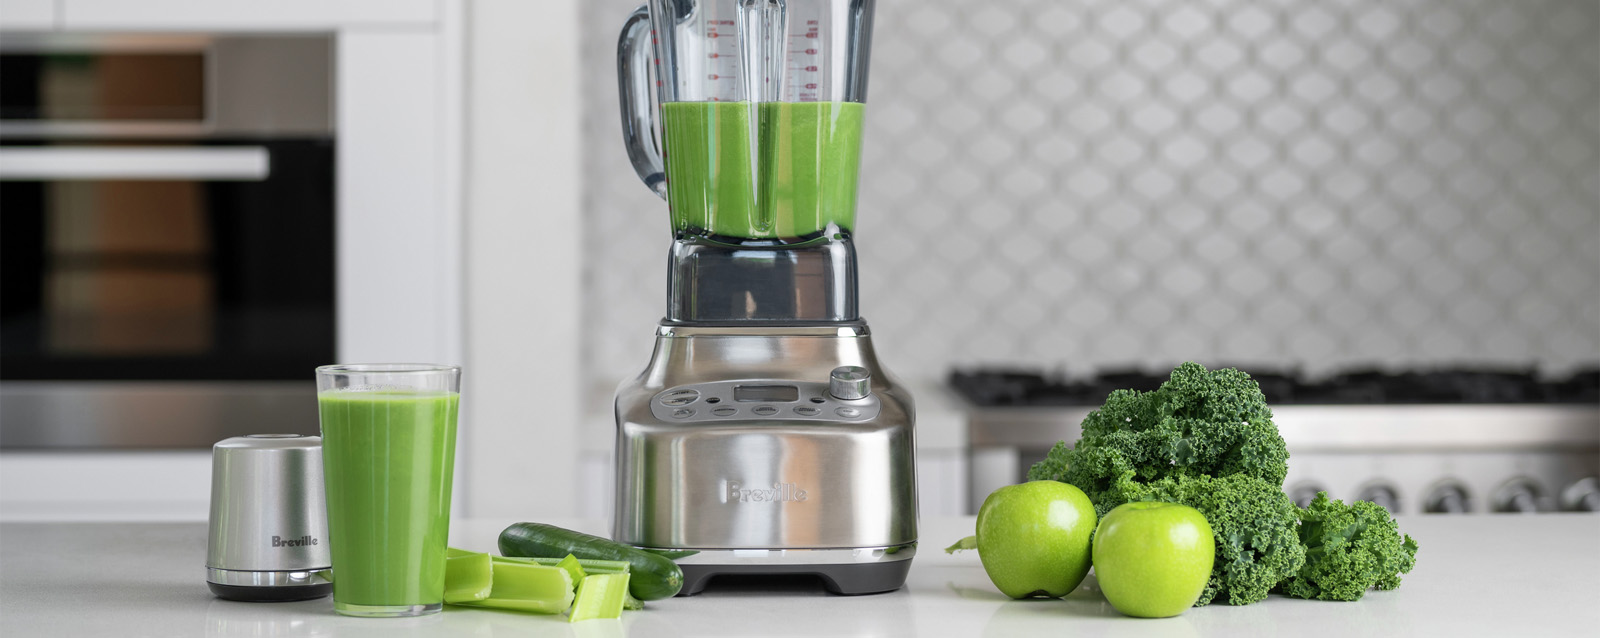 Breville The Super Q™ and Vac Q™ Review: More Than Just A Blender | Norman